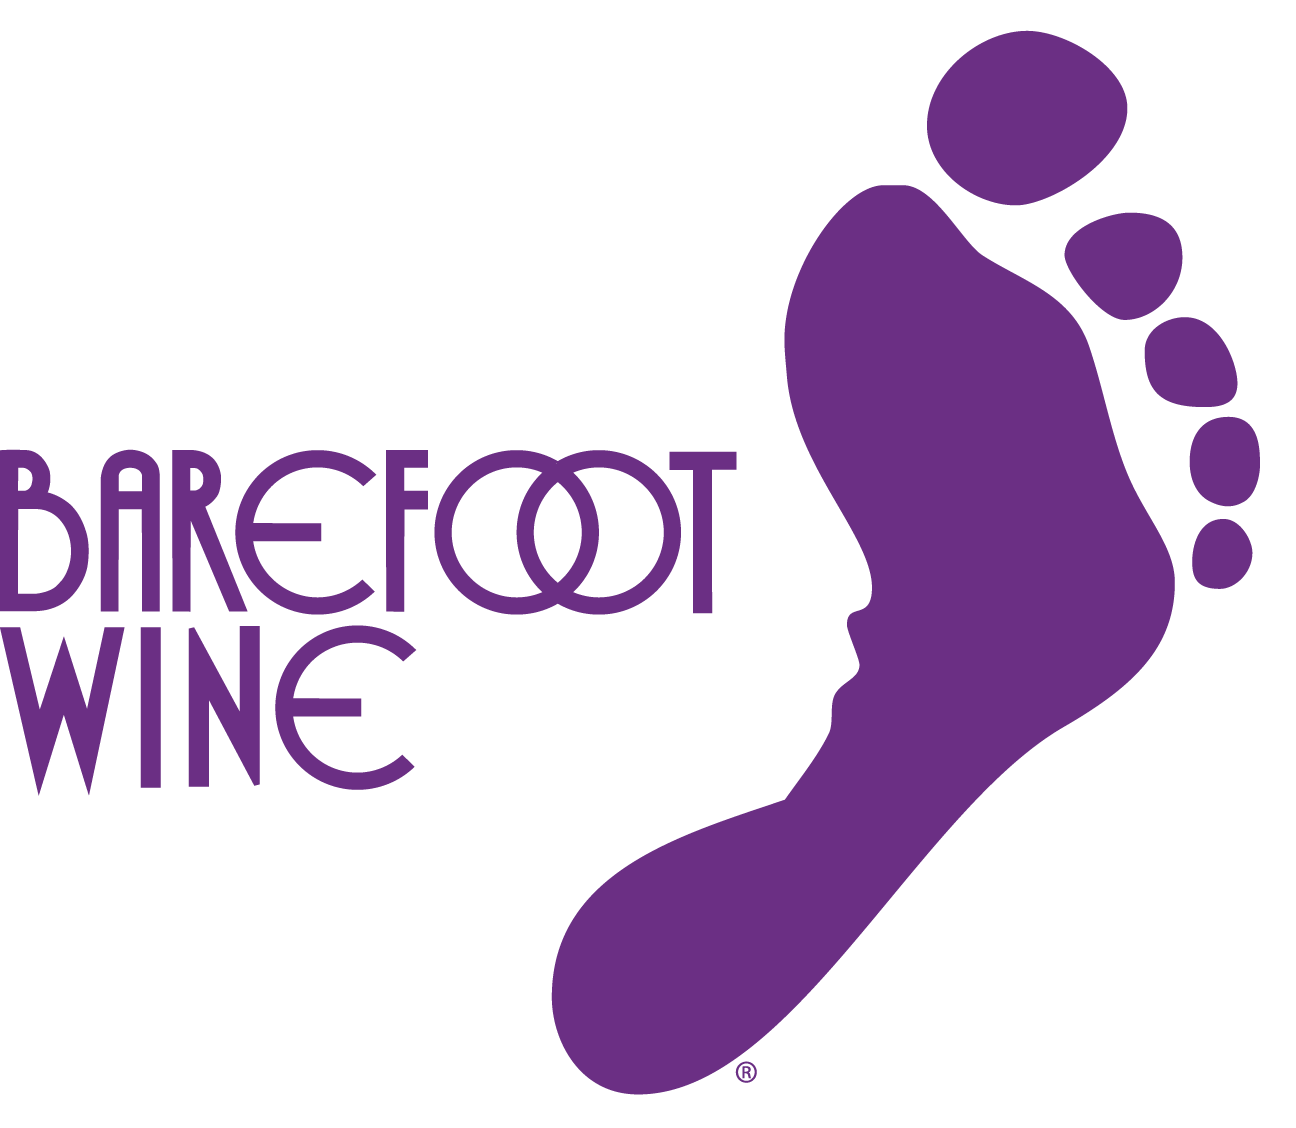 barefootwineslogo.png